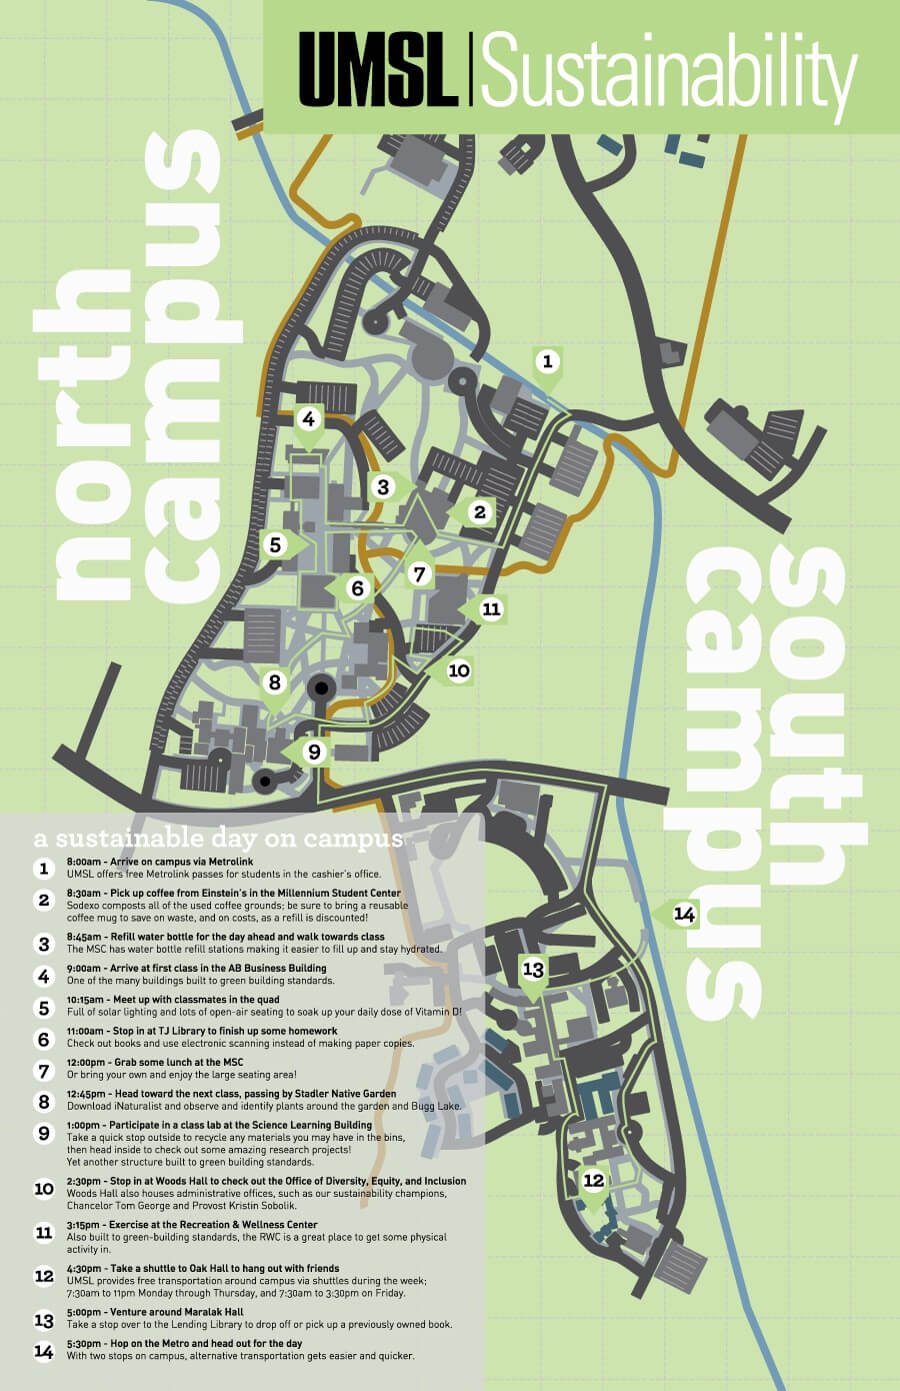 umsl south campus map Map Of Sustainability Features On Campus umsl south campus map